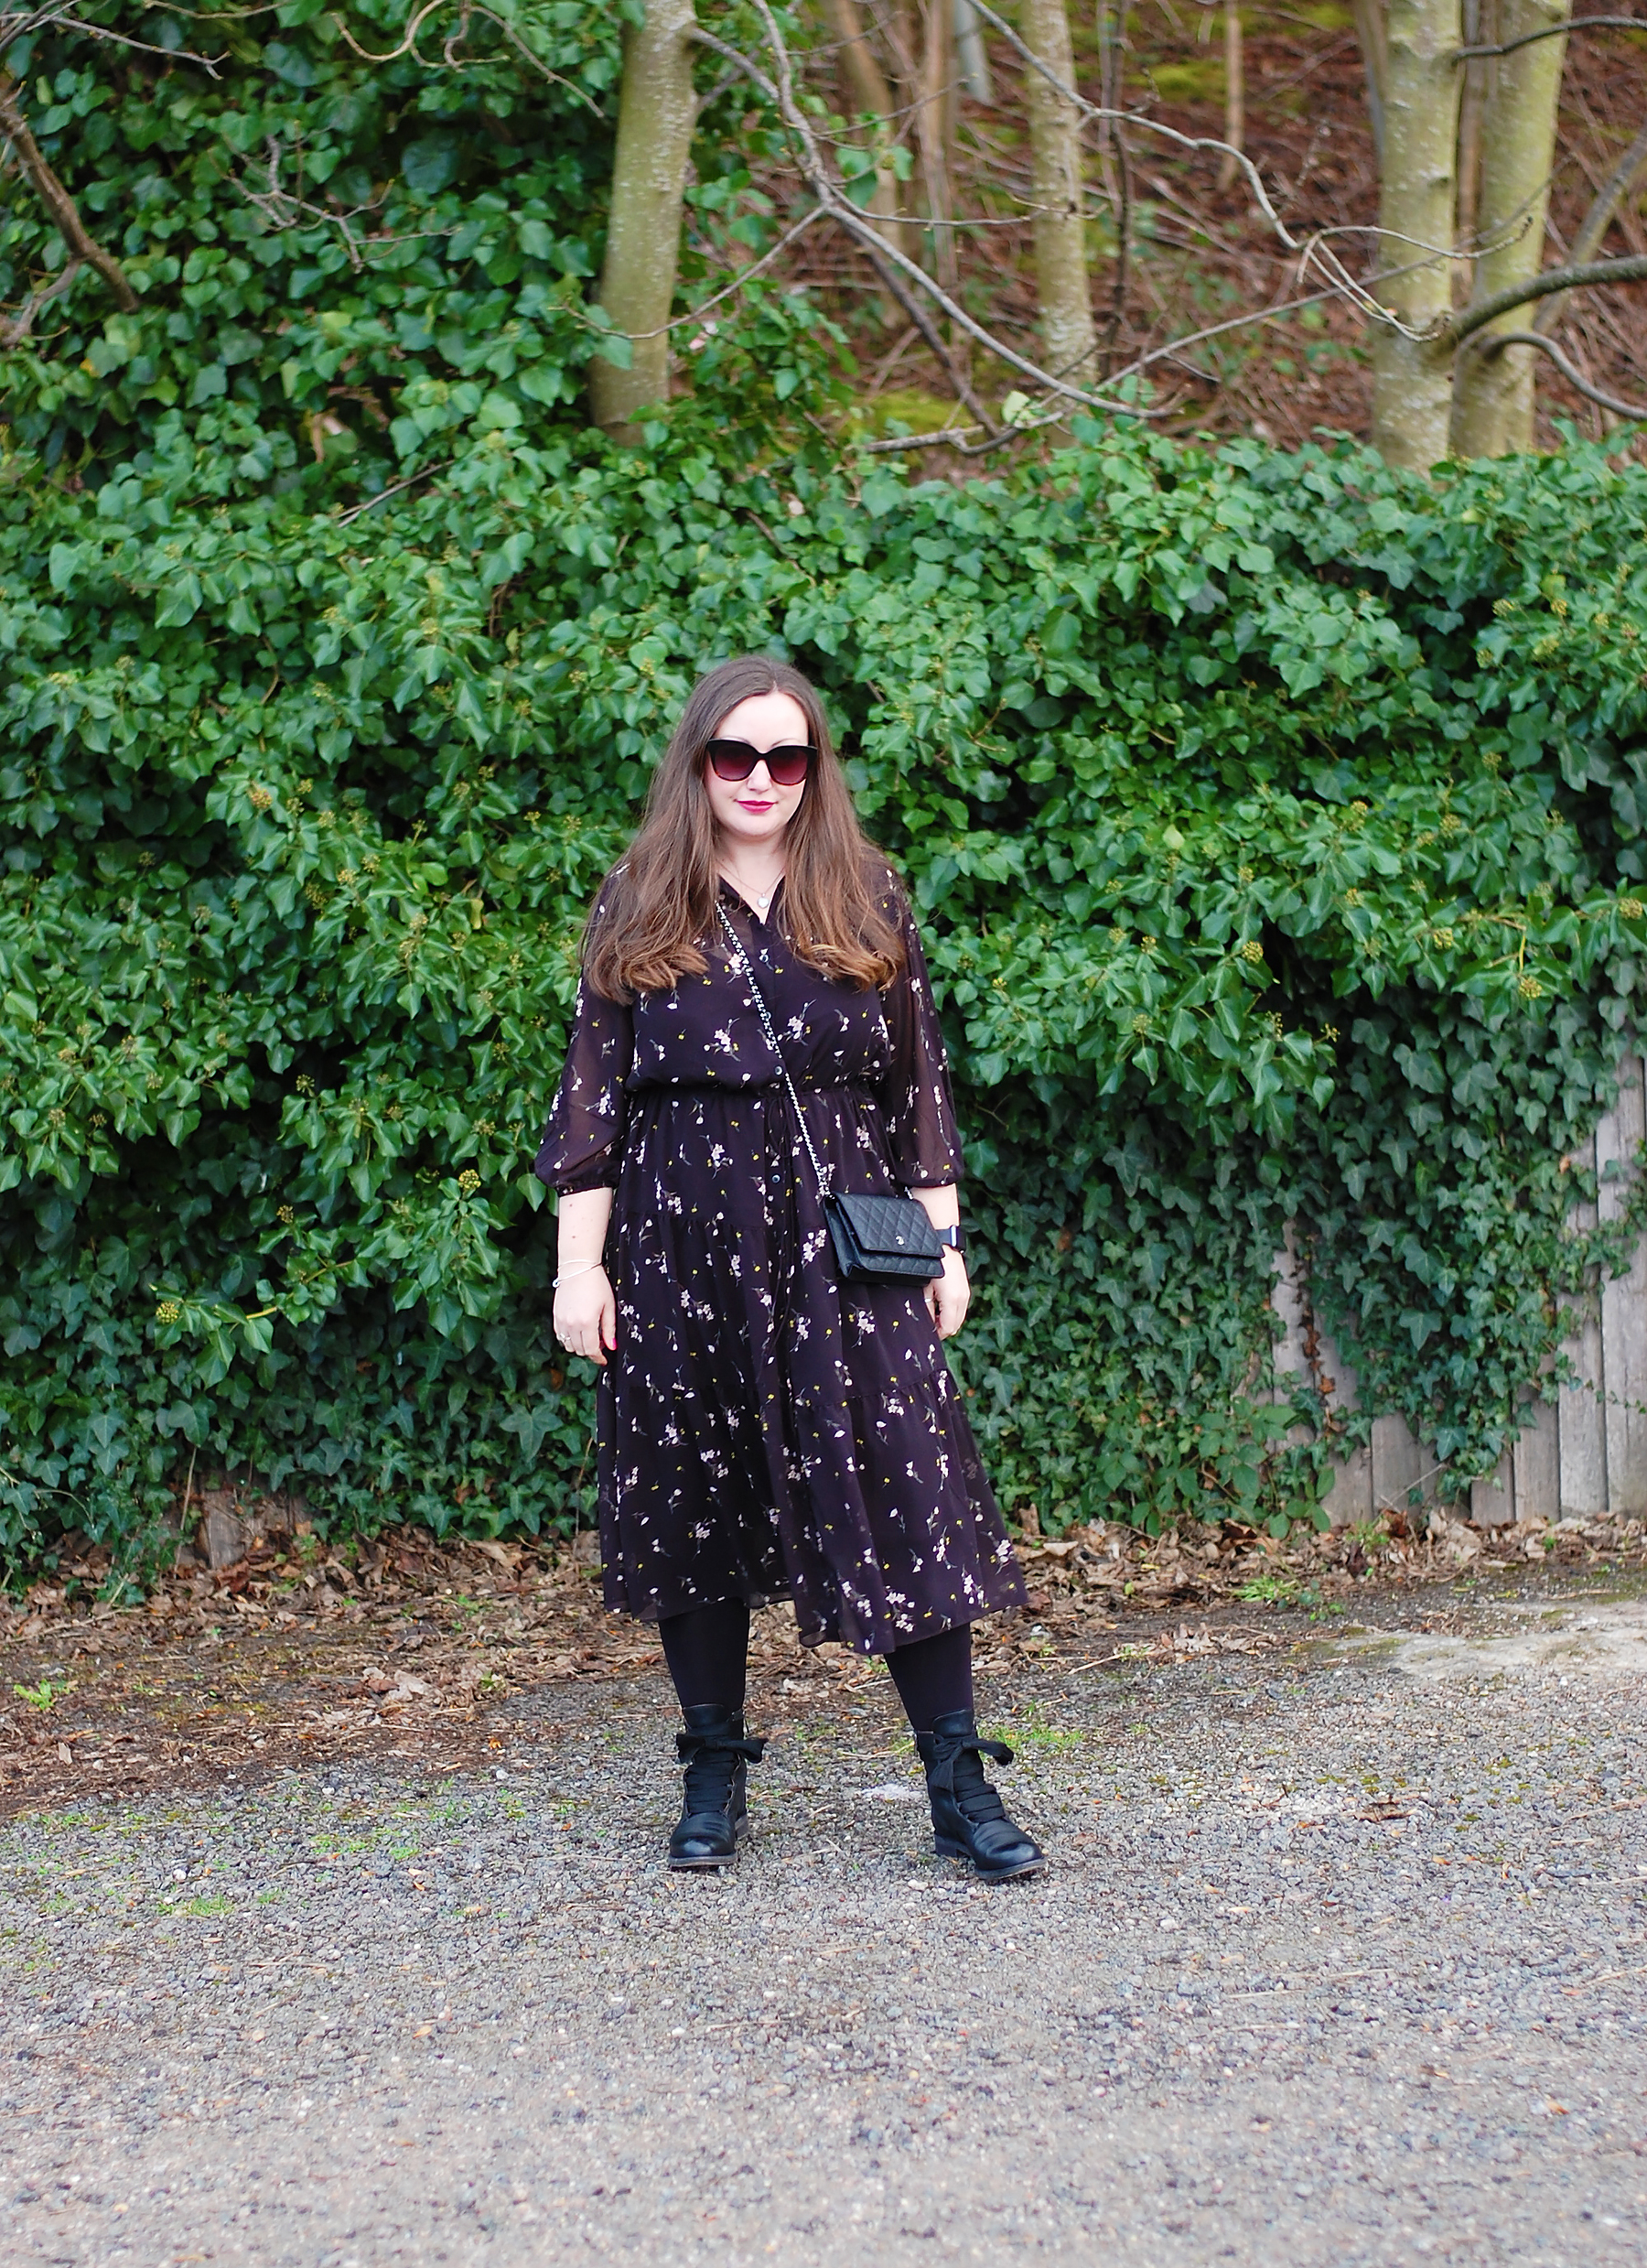 How to style a floral dress in the winter